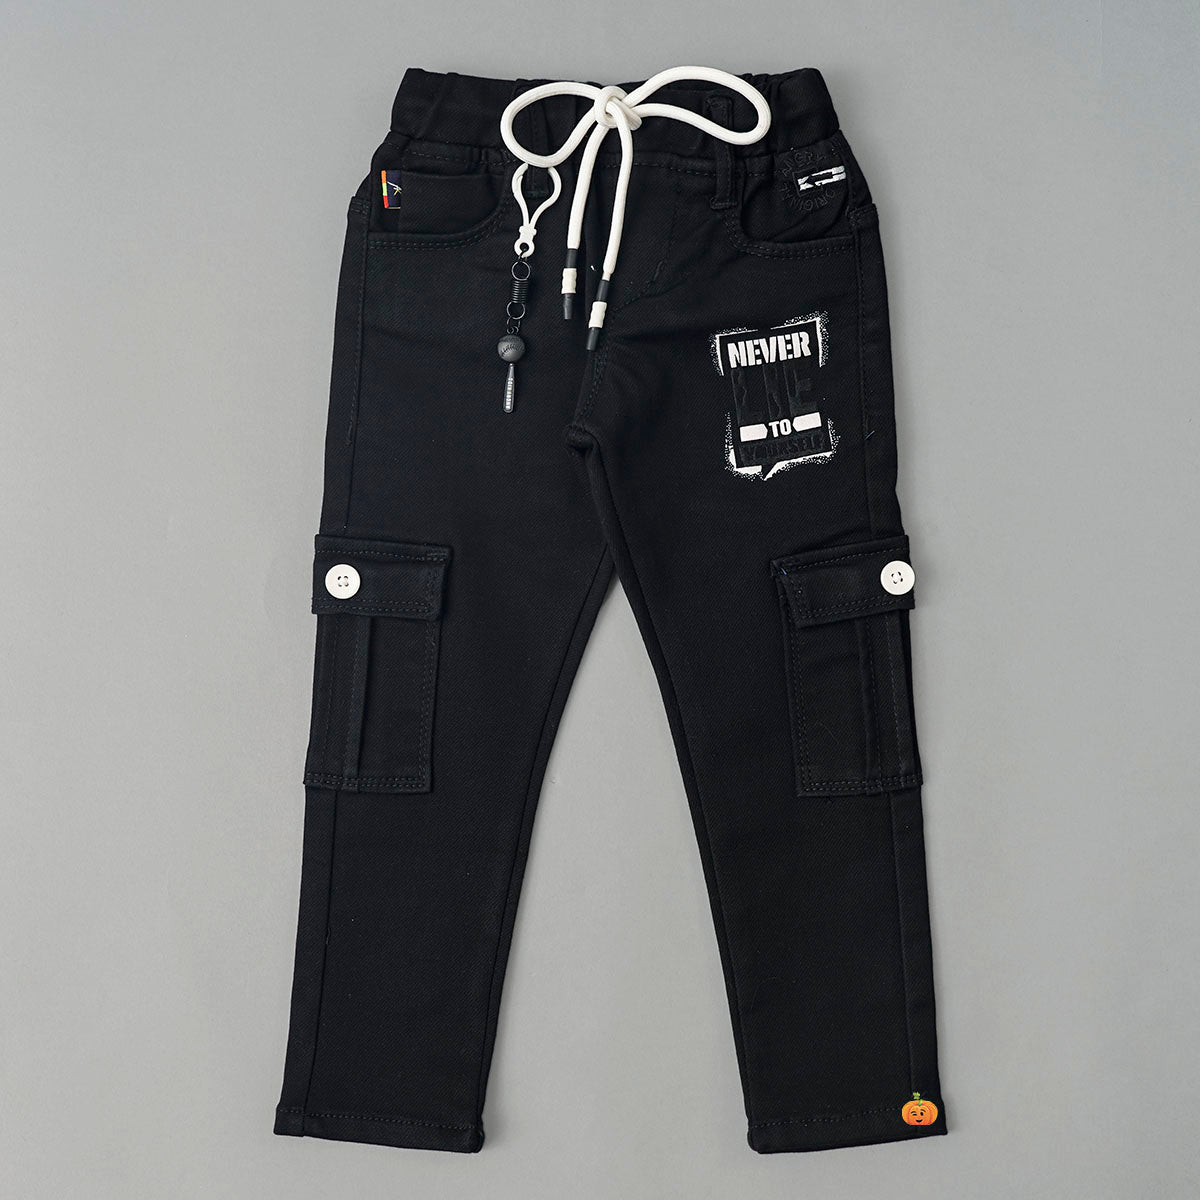 Boys Black Relaxed Fit Skin Friendly Breathable Cotton Plain School Trousers  Age Group: Below 18 Years at Best Price in Rourkela | Jena Uniform